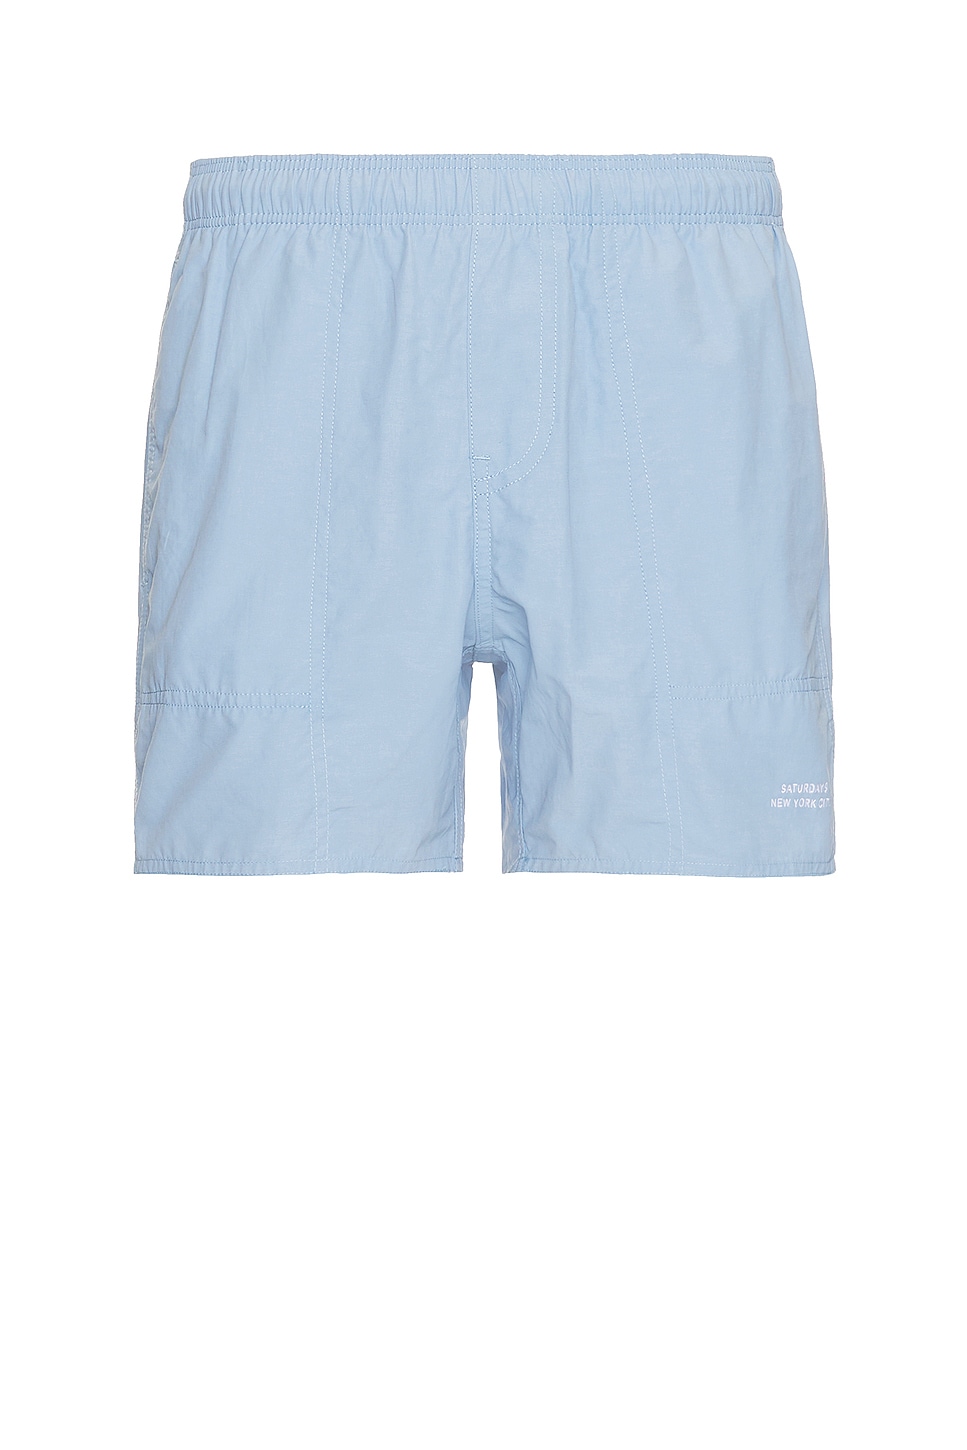 Image 1 of SATURDAYS NYC Talley Swim Short in Forever Blue